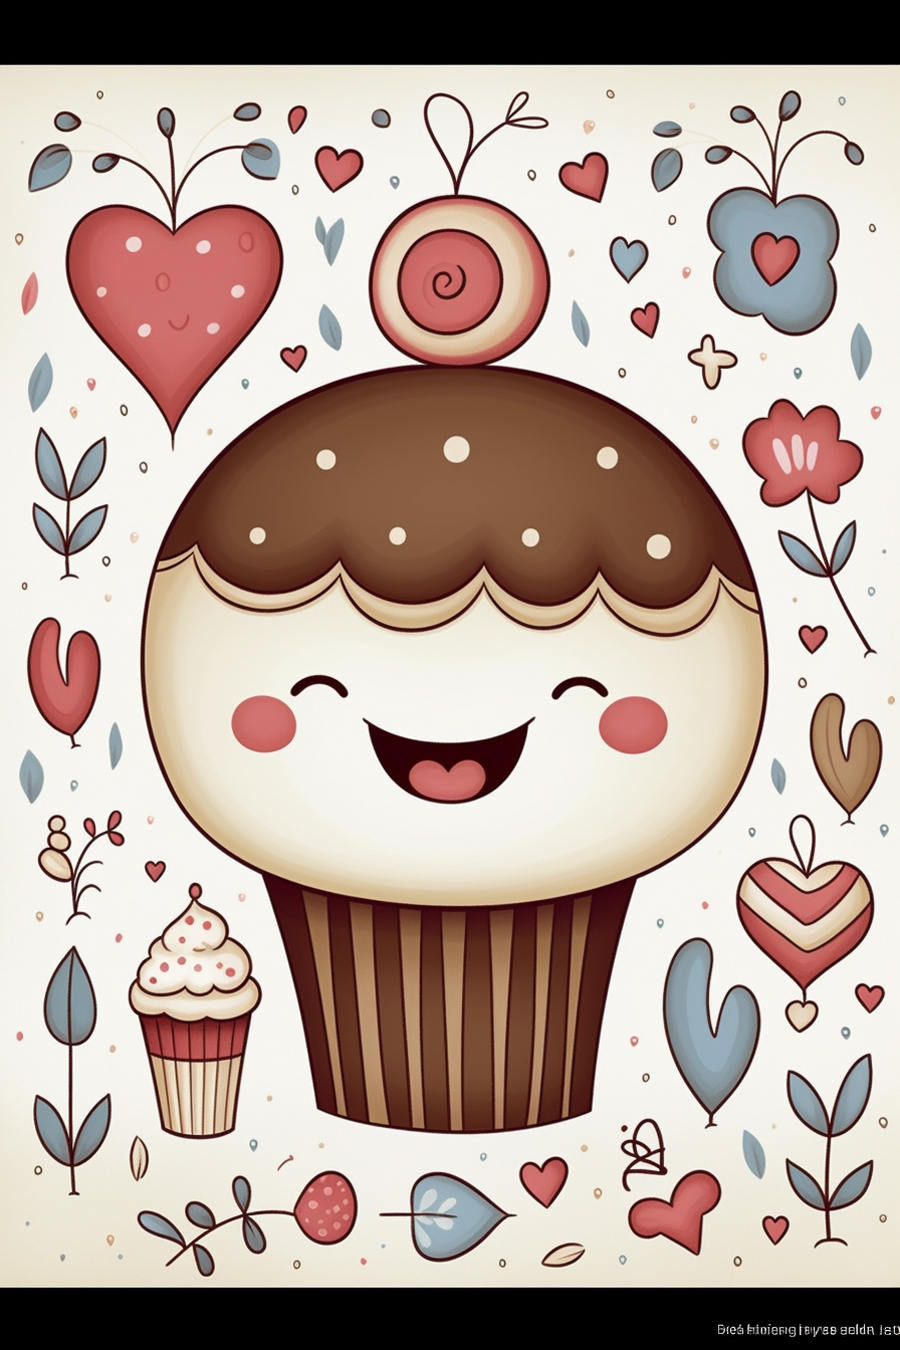 An illustration of a cupcake with hearts and flowers.